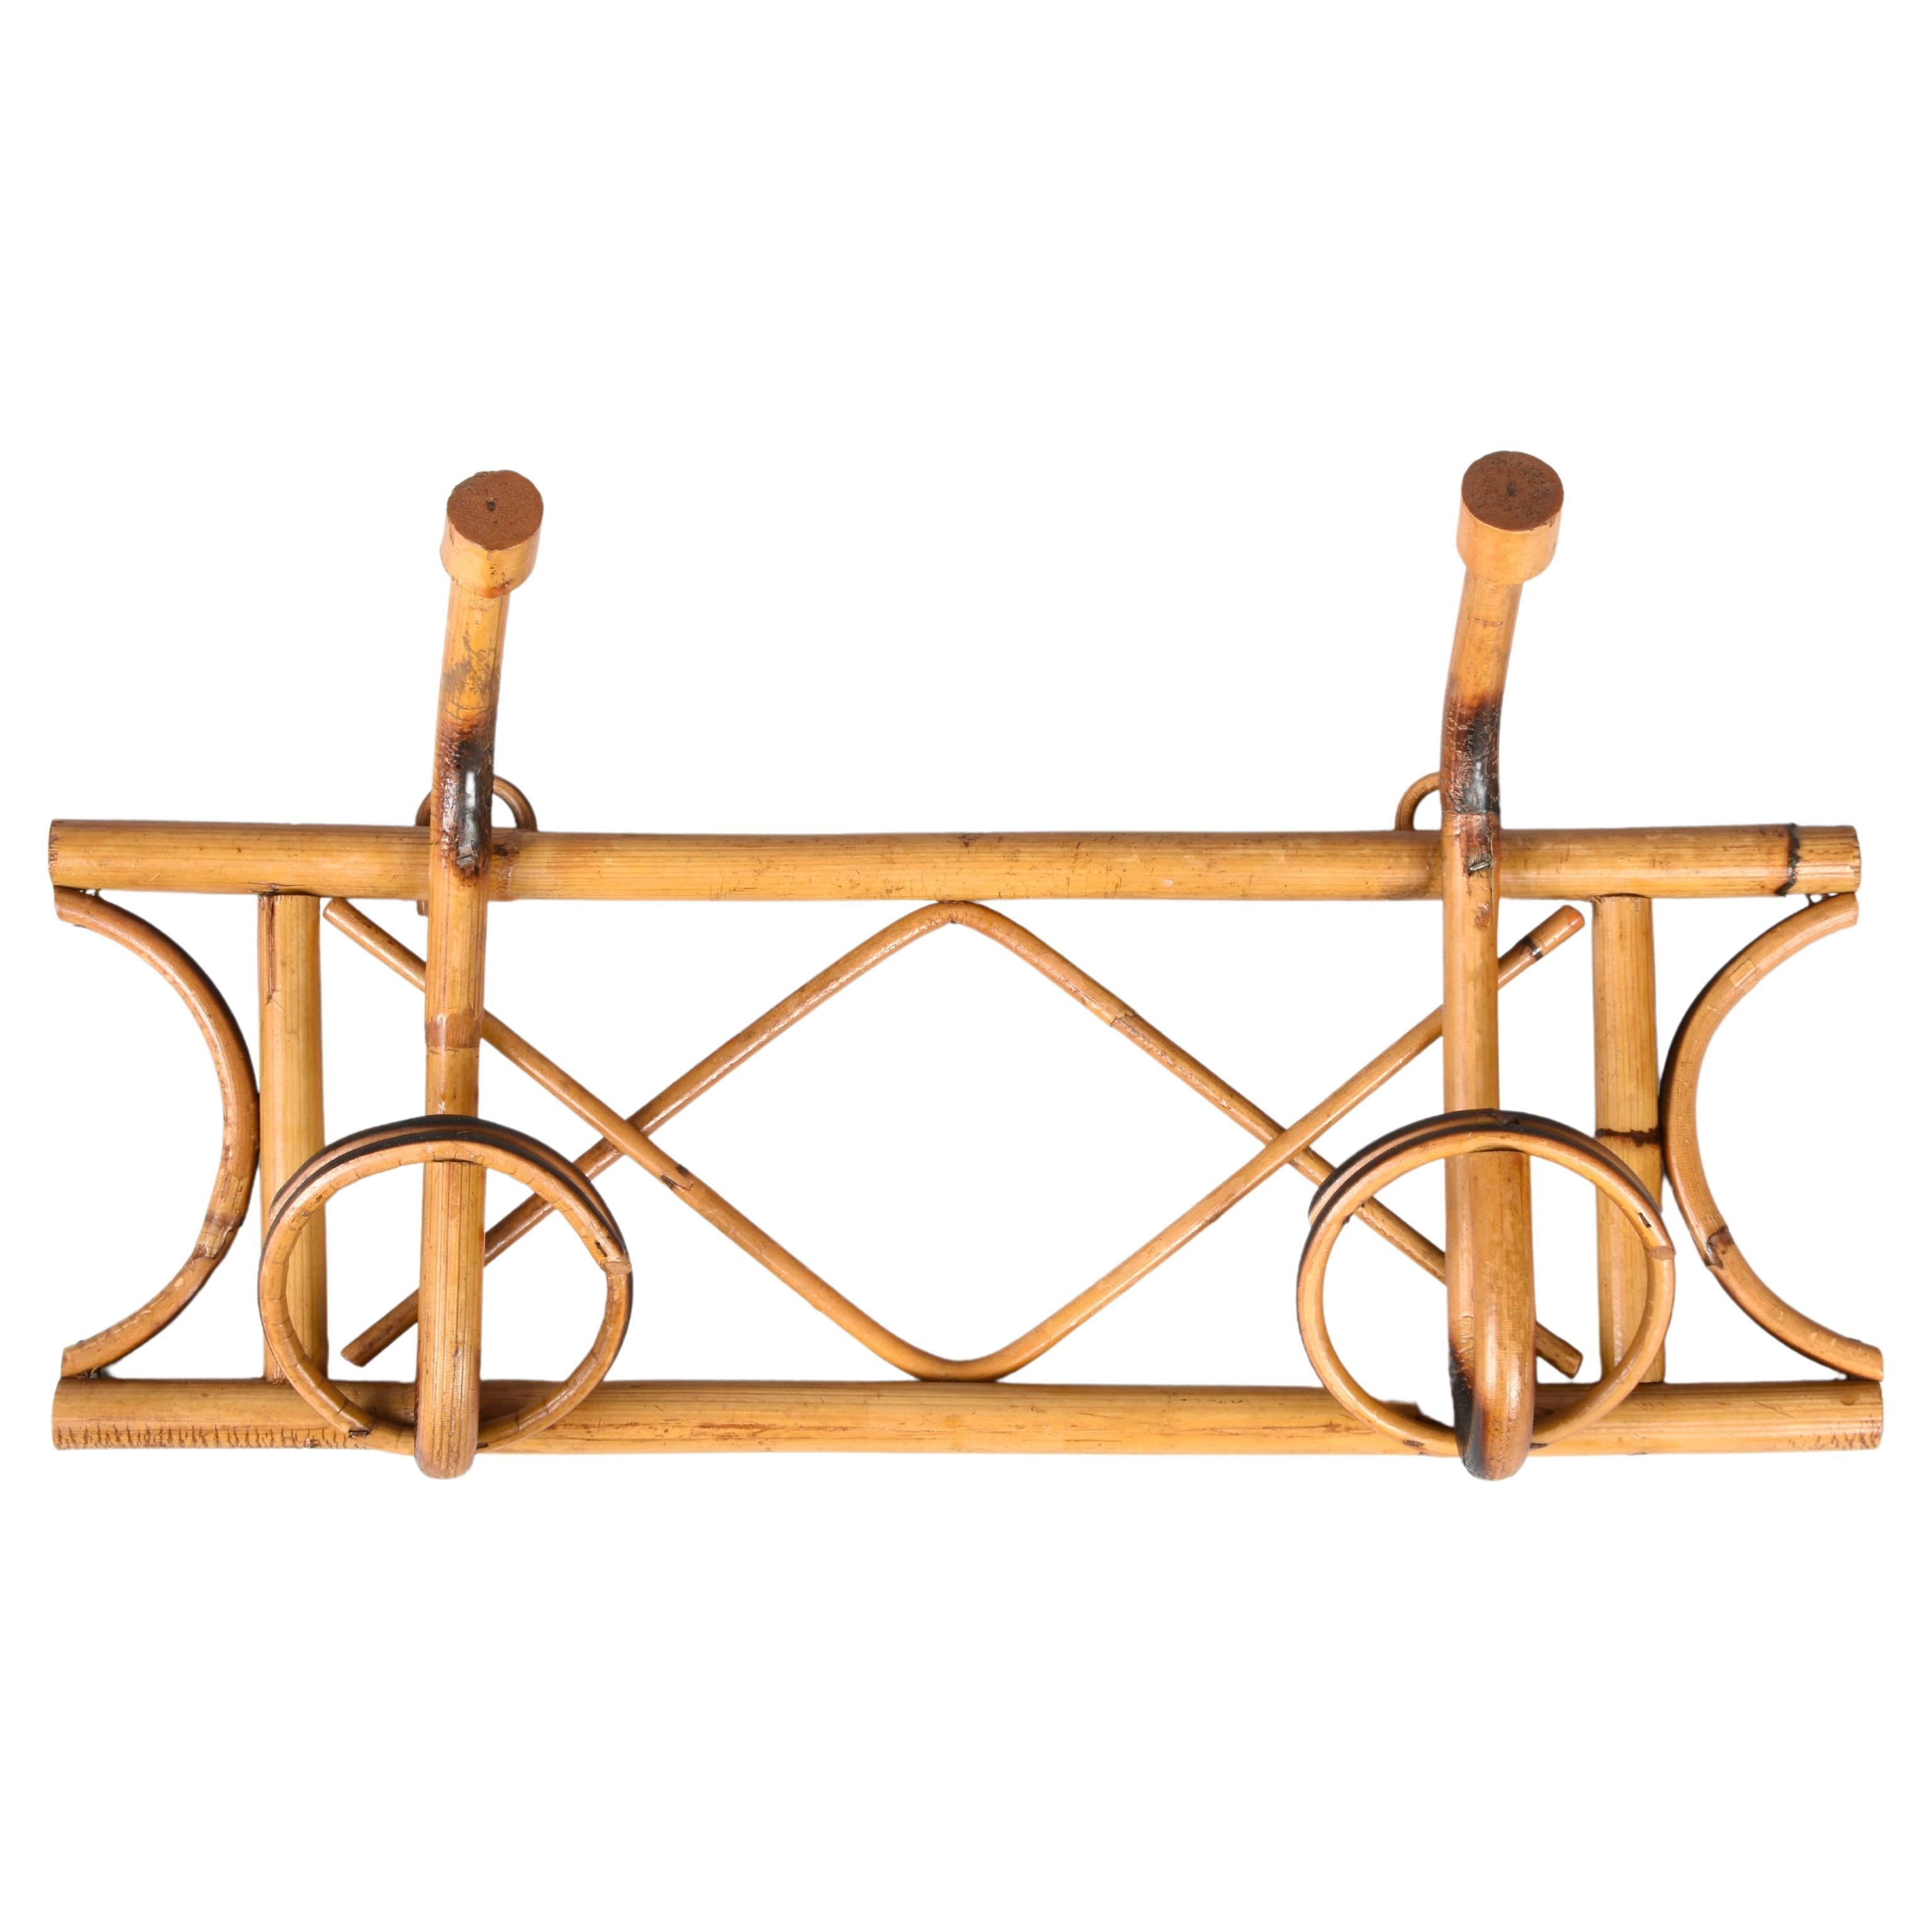 Amazing French Riviera midcentury rattan and bamboo coat hanger. This wonderful piece was made in Italy during the 1960s.

This unique item features a structure in bamboo canes and two brown rattan upper hooks and lower hooks for hanging coats.